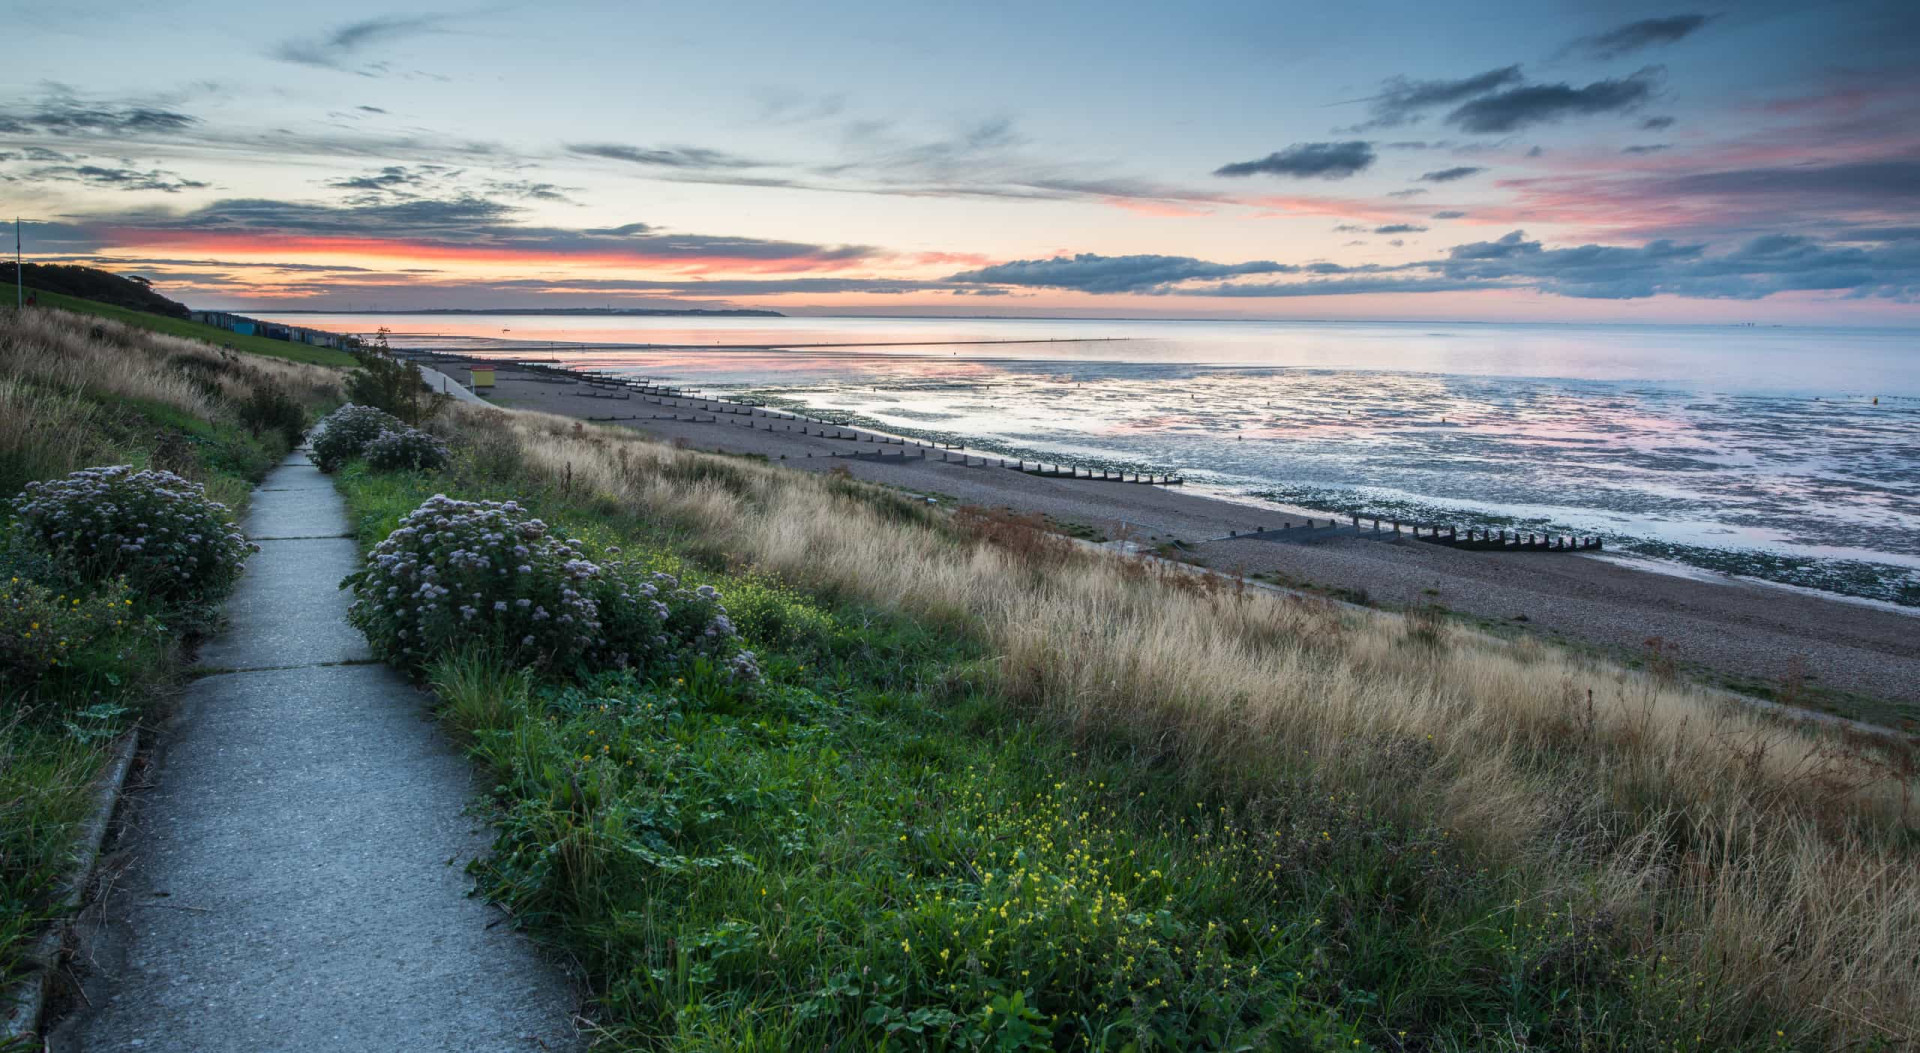 <p>This lush seaside town is known for its very colorful buildings and sweeping seascape. All of the seafood is fresh off the boat, so be sure to settle down for a delicious fish dinner when you visit Whitstable, Kent.</p>